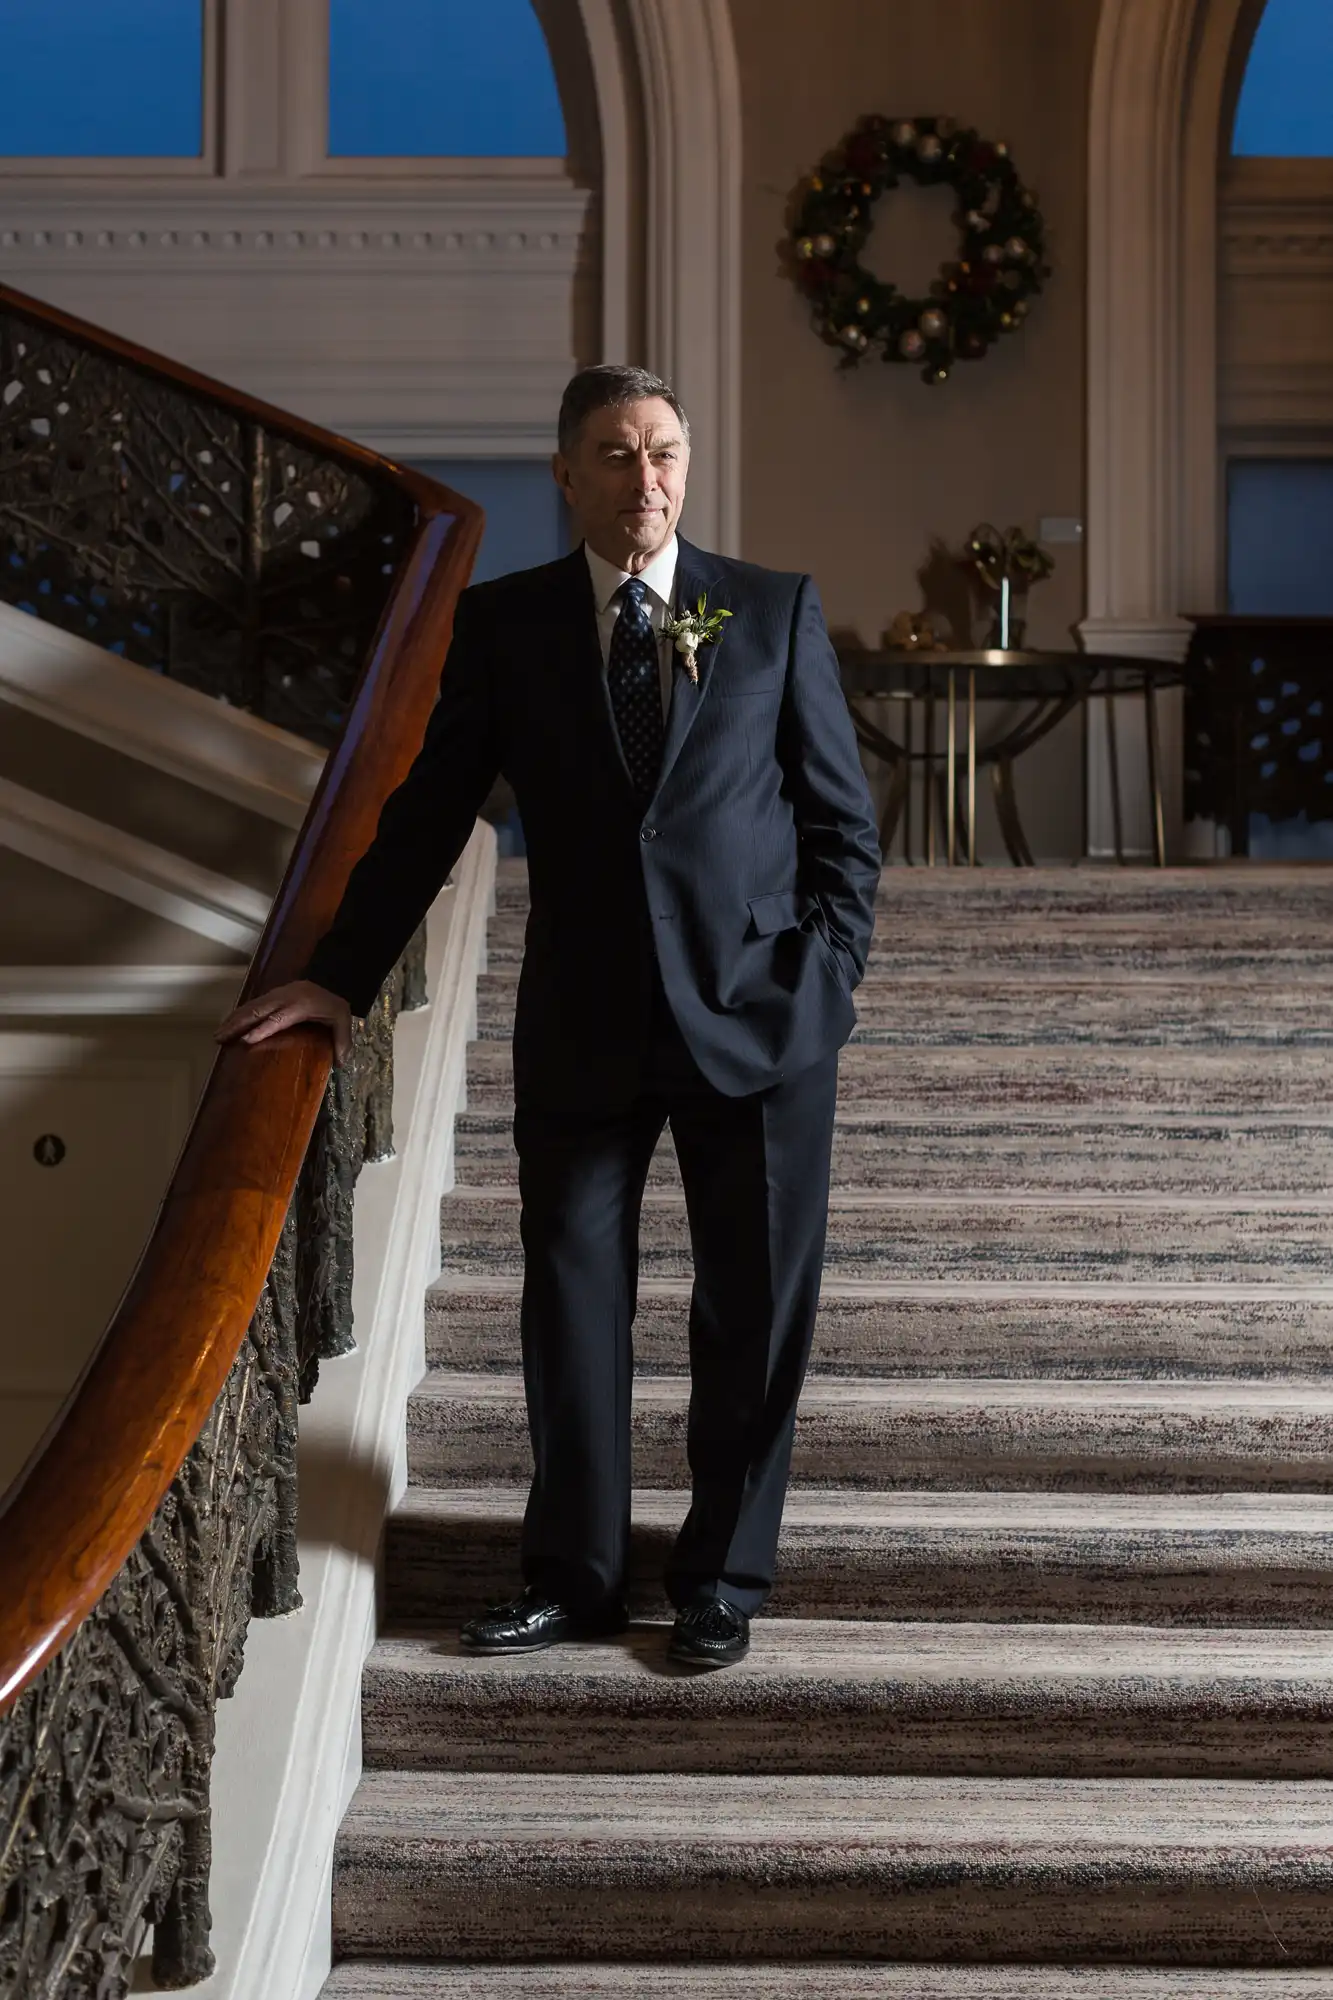 An older man in a dark suit and boutonniere stands on a grand staircase with a wooden railing, looking pensively to the side.